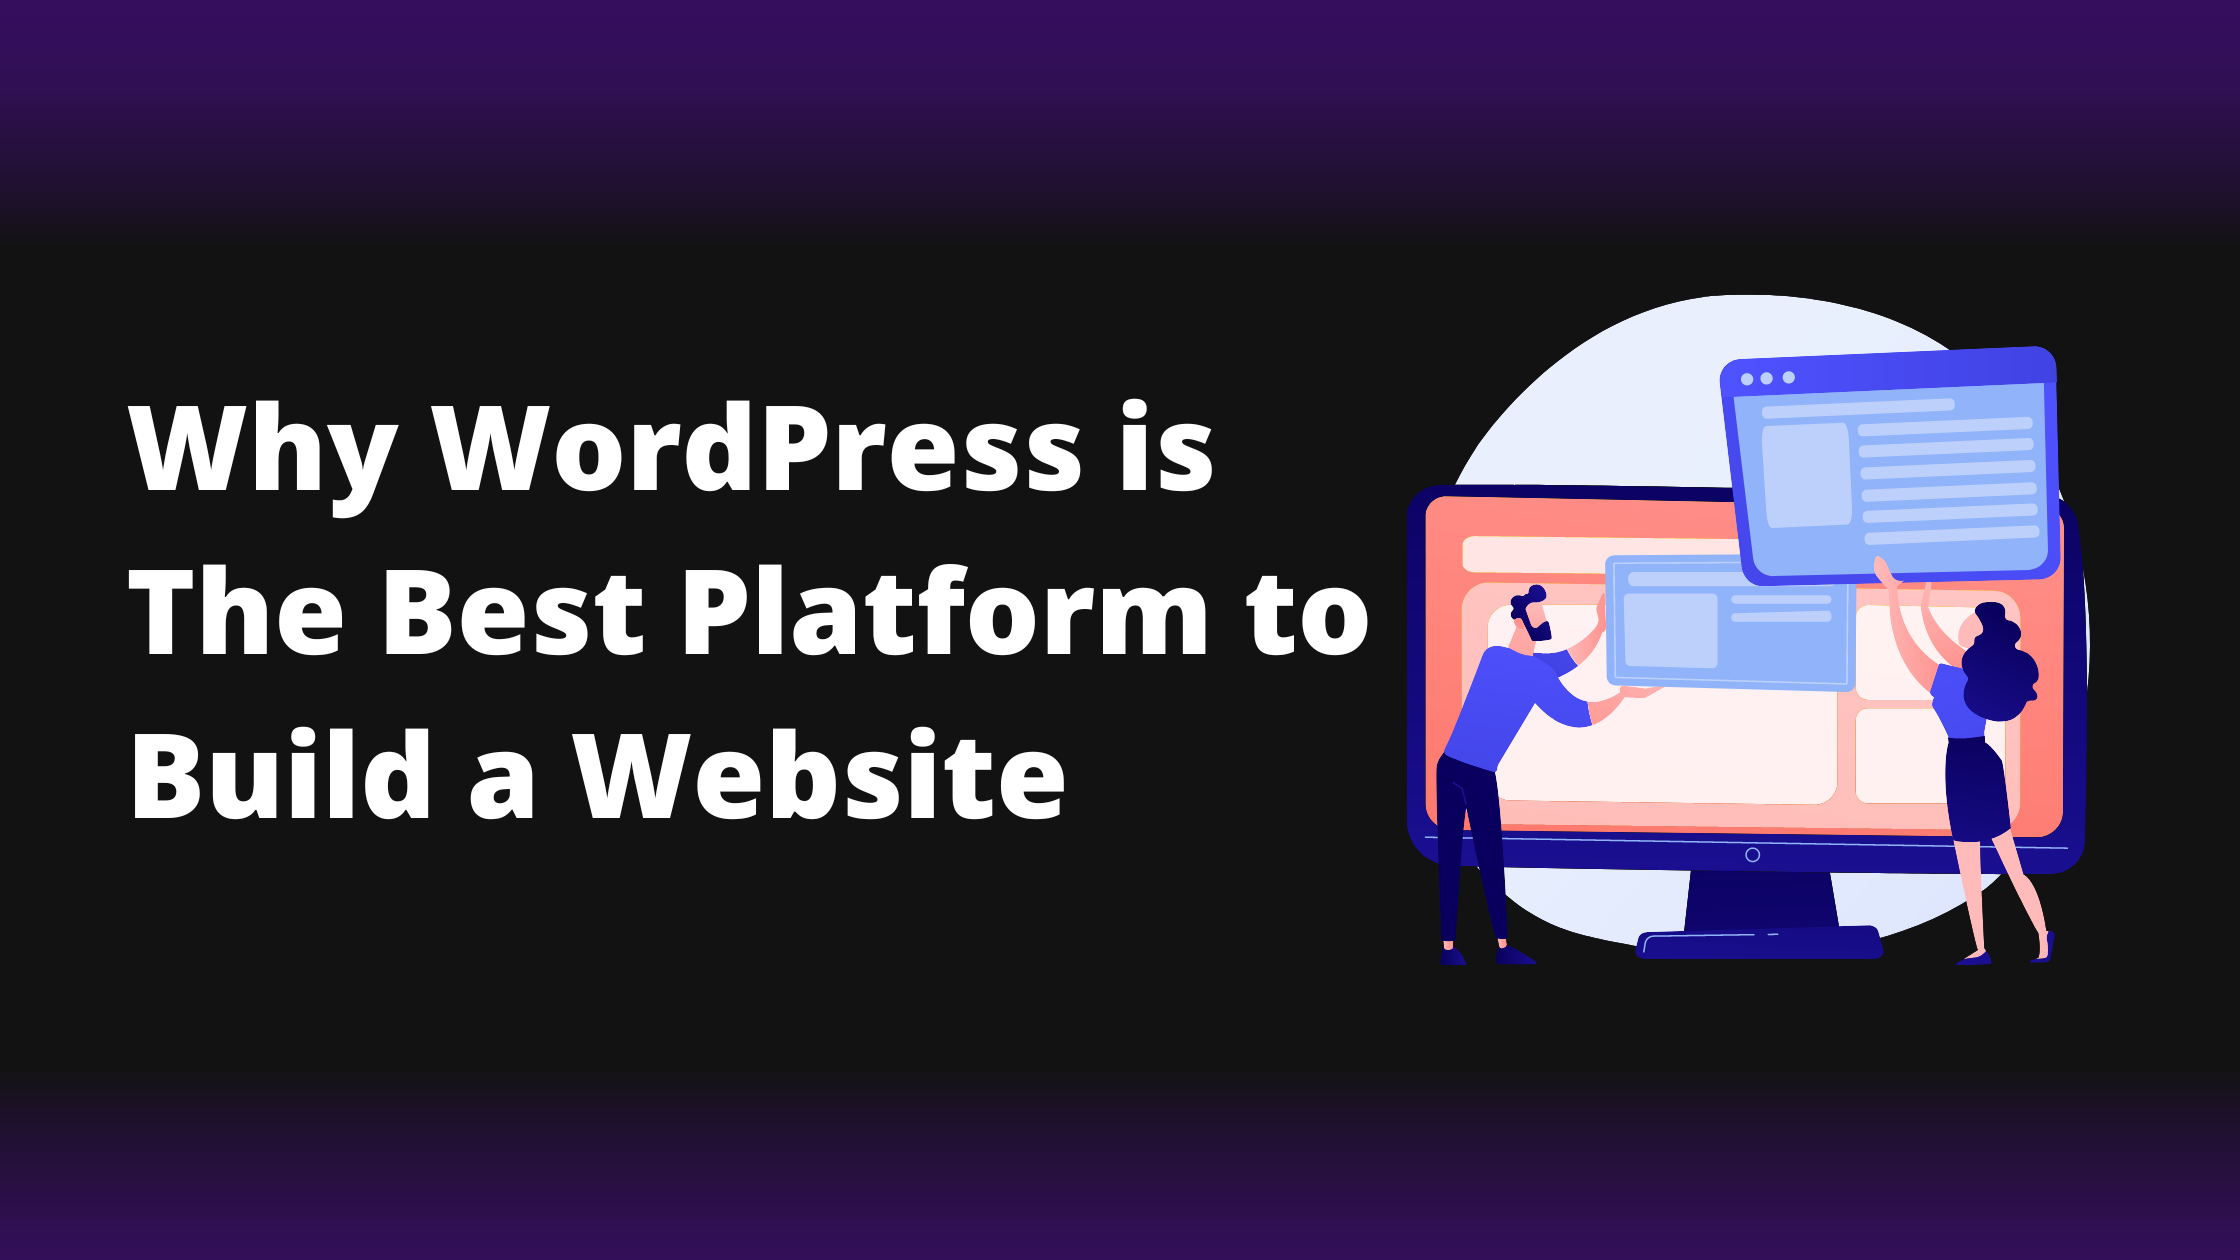 Reasons why wordpress is the best platform to build a website